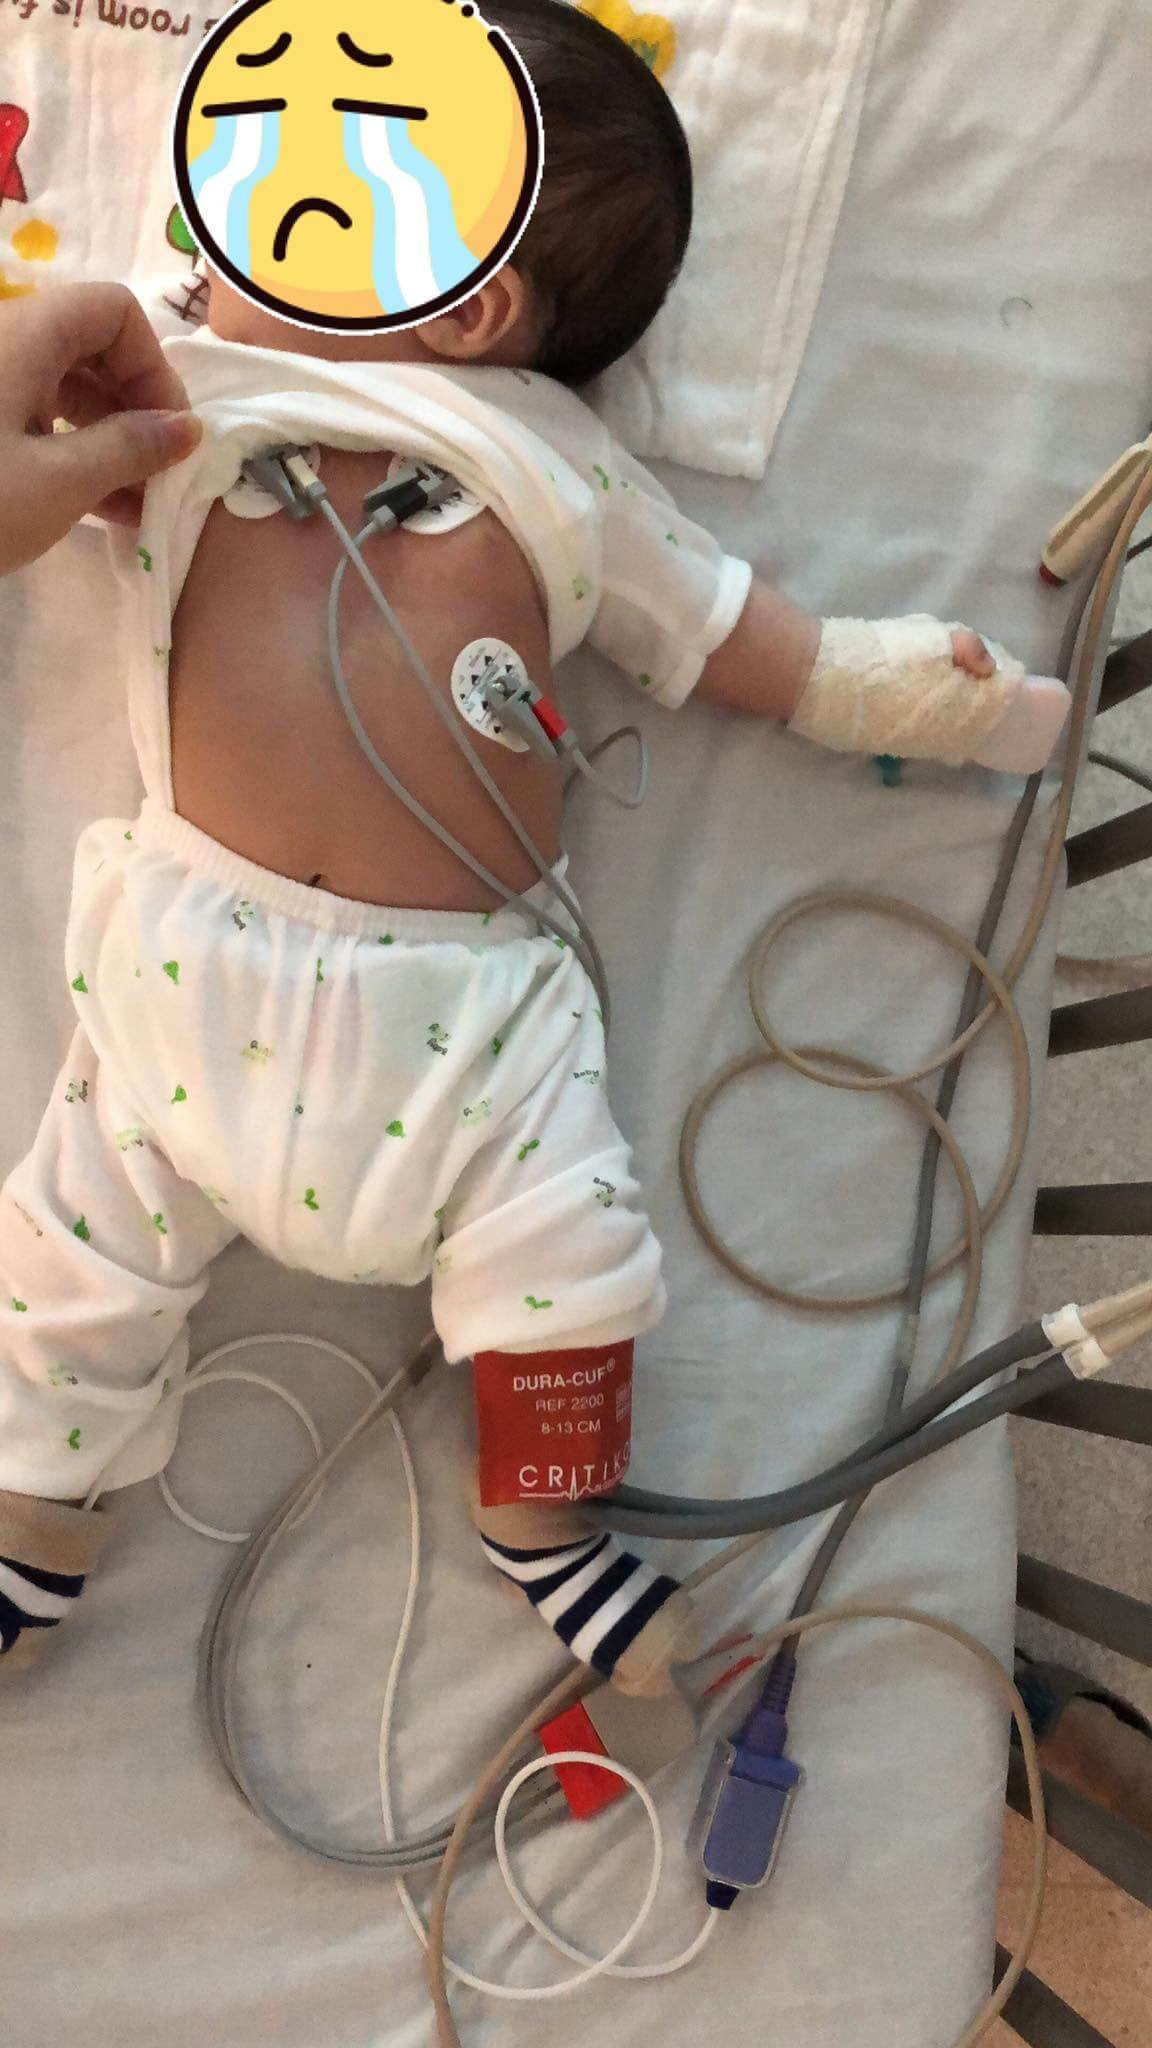 This Poor Infant Now Has Blood Clots and 2 Broken Bones After His Nanny Dropped Him Down the Stairs - WORLD OF BUZZ 2